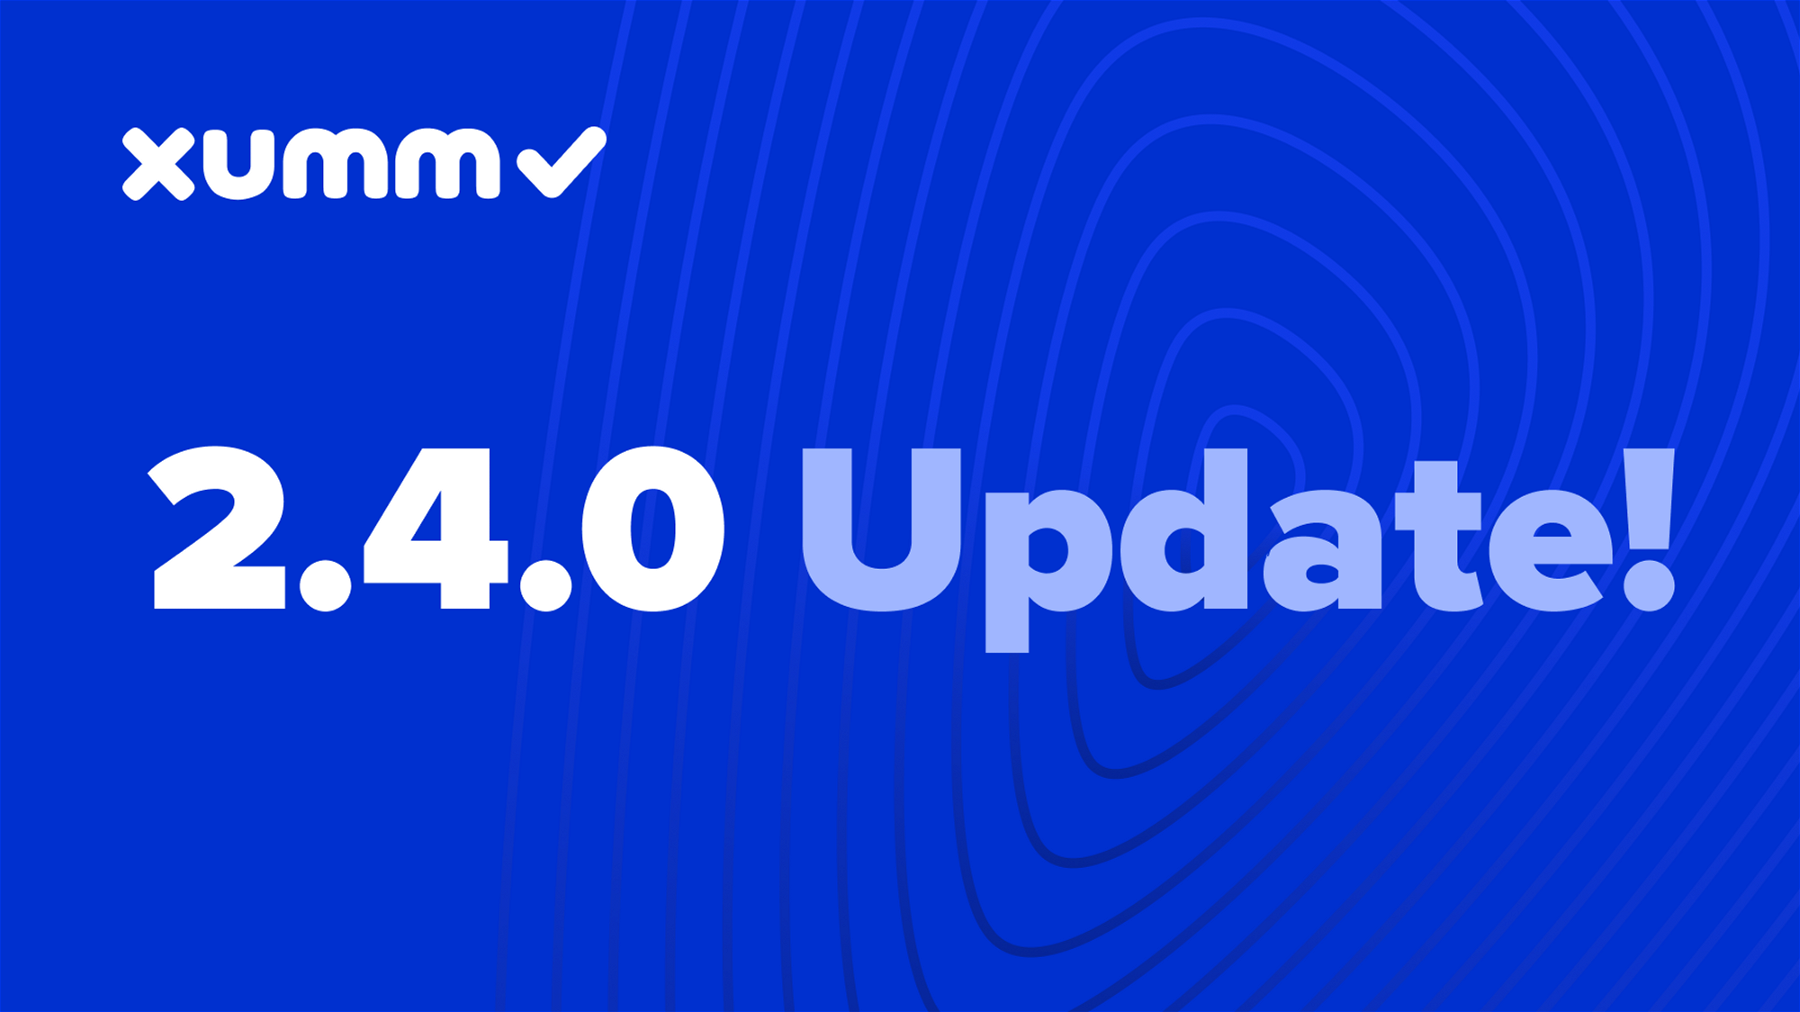 Xumm 2.4.0 is full of new features and improvements!